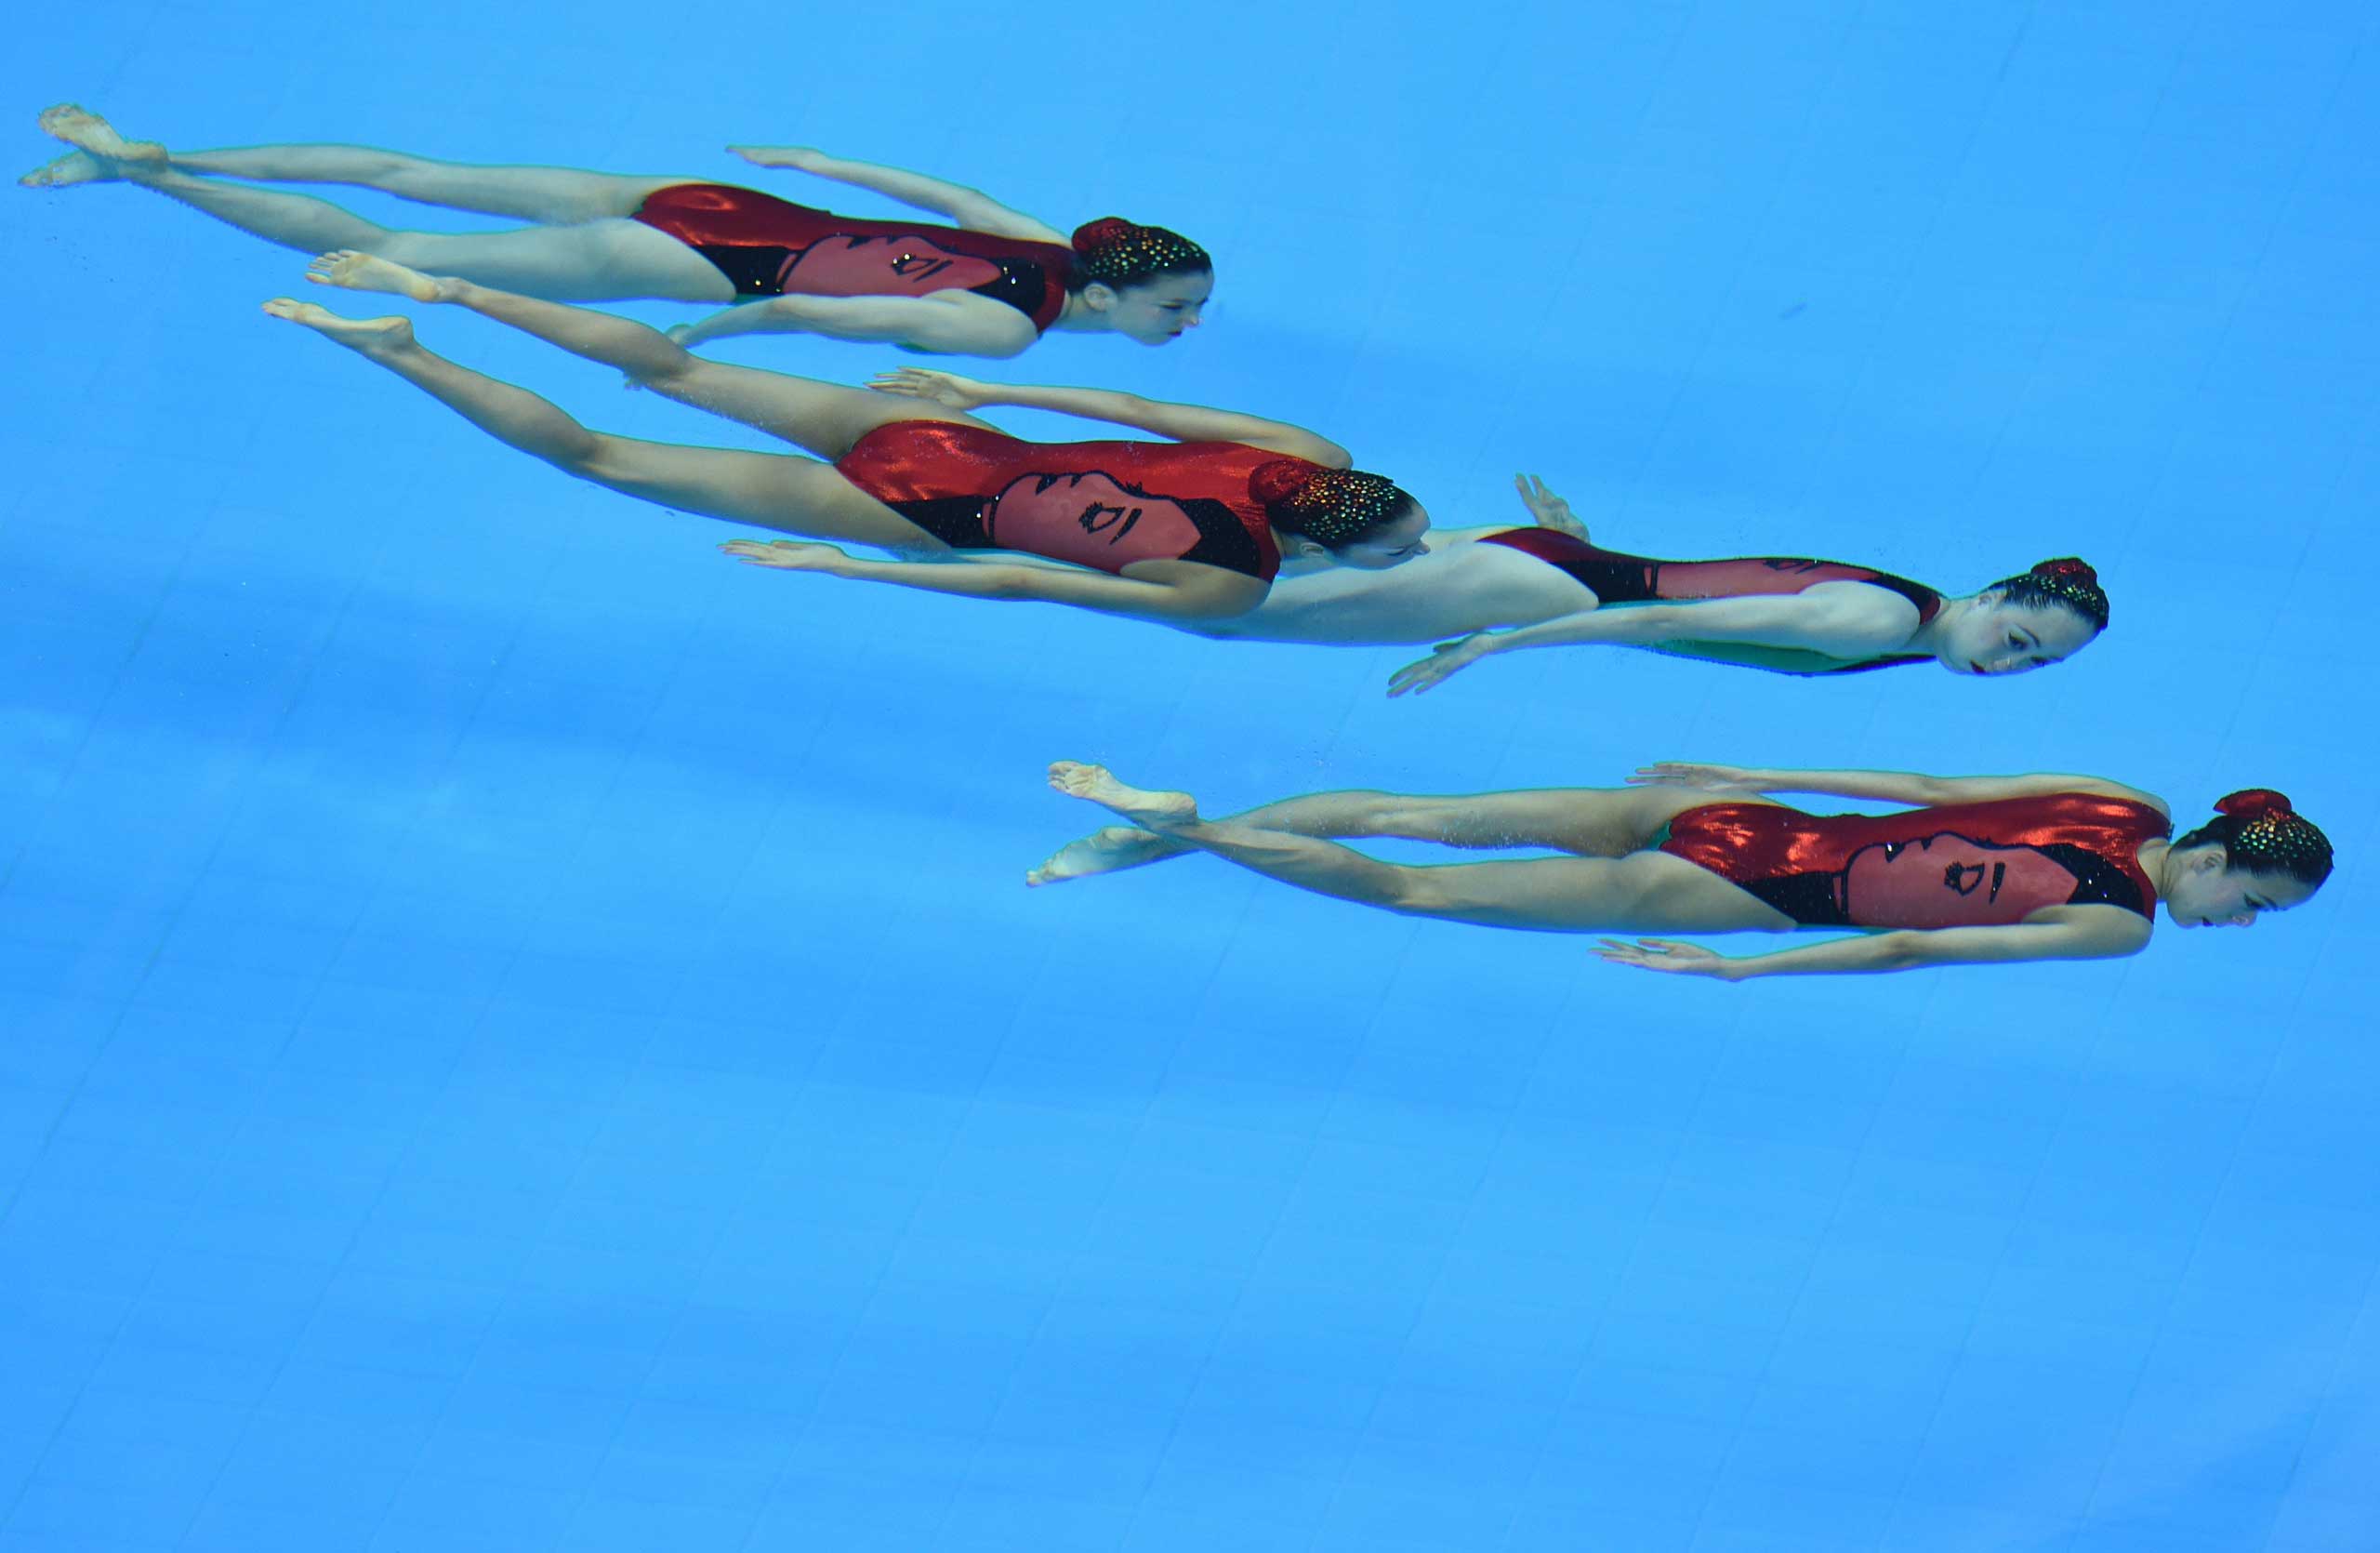 Sept. 23, 2014. Japan's swimmers compete in the free combination synchronised swimming event final during the 2014 Asian Games at the Munhak Park Tae-hwan Aquatics Centre.